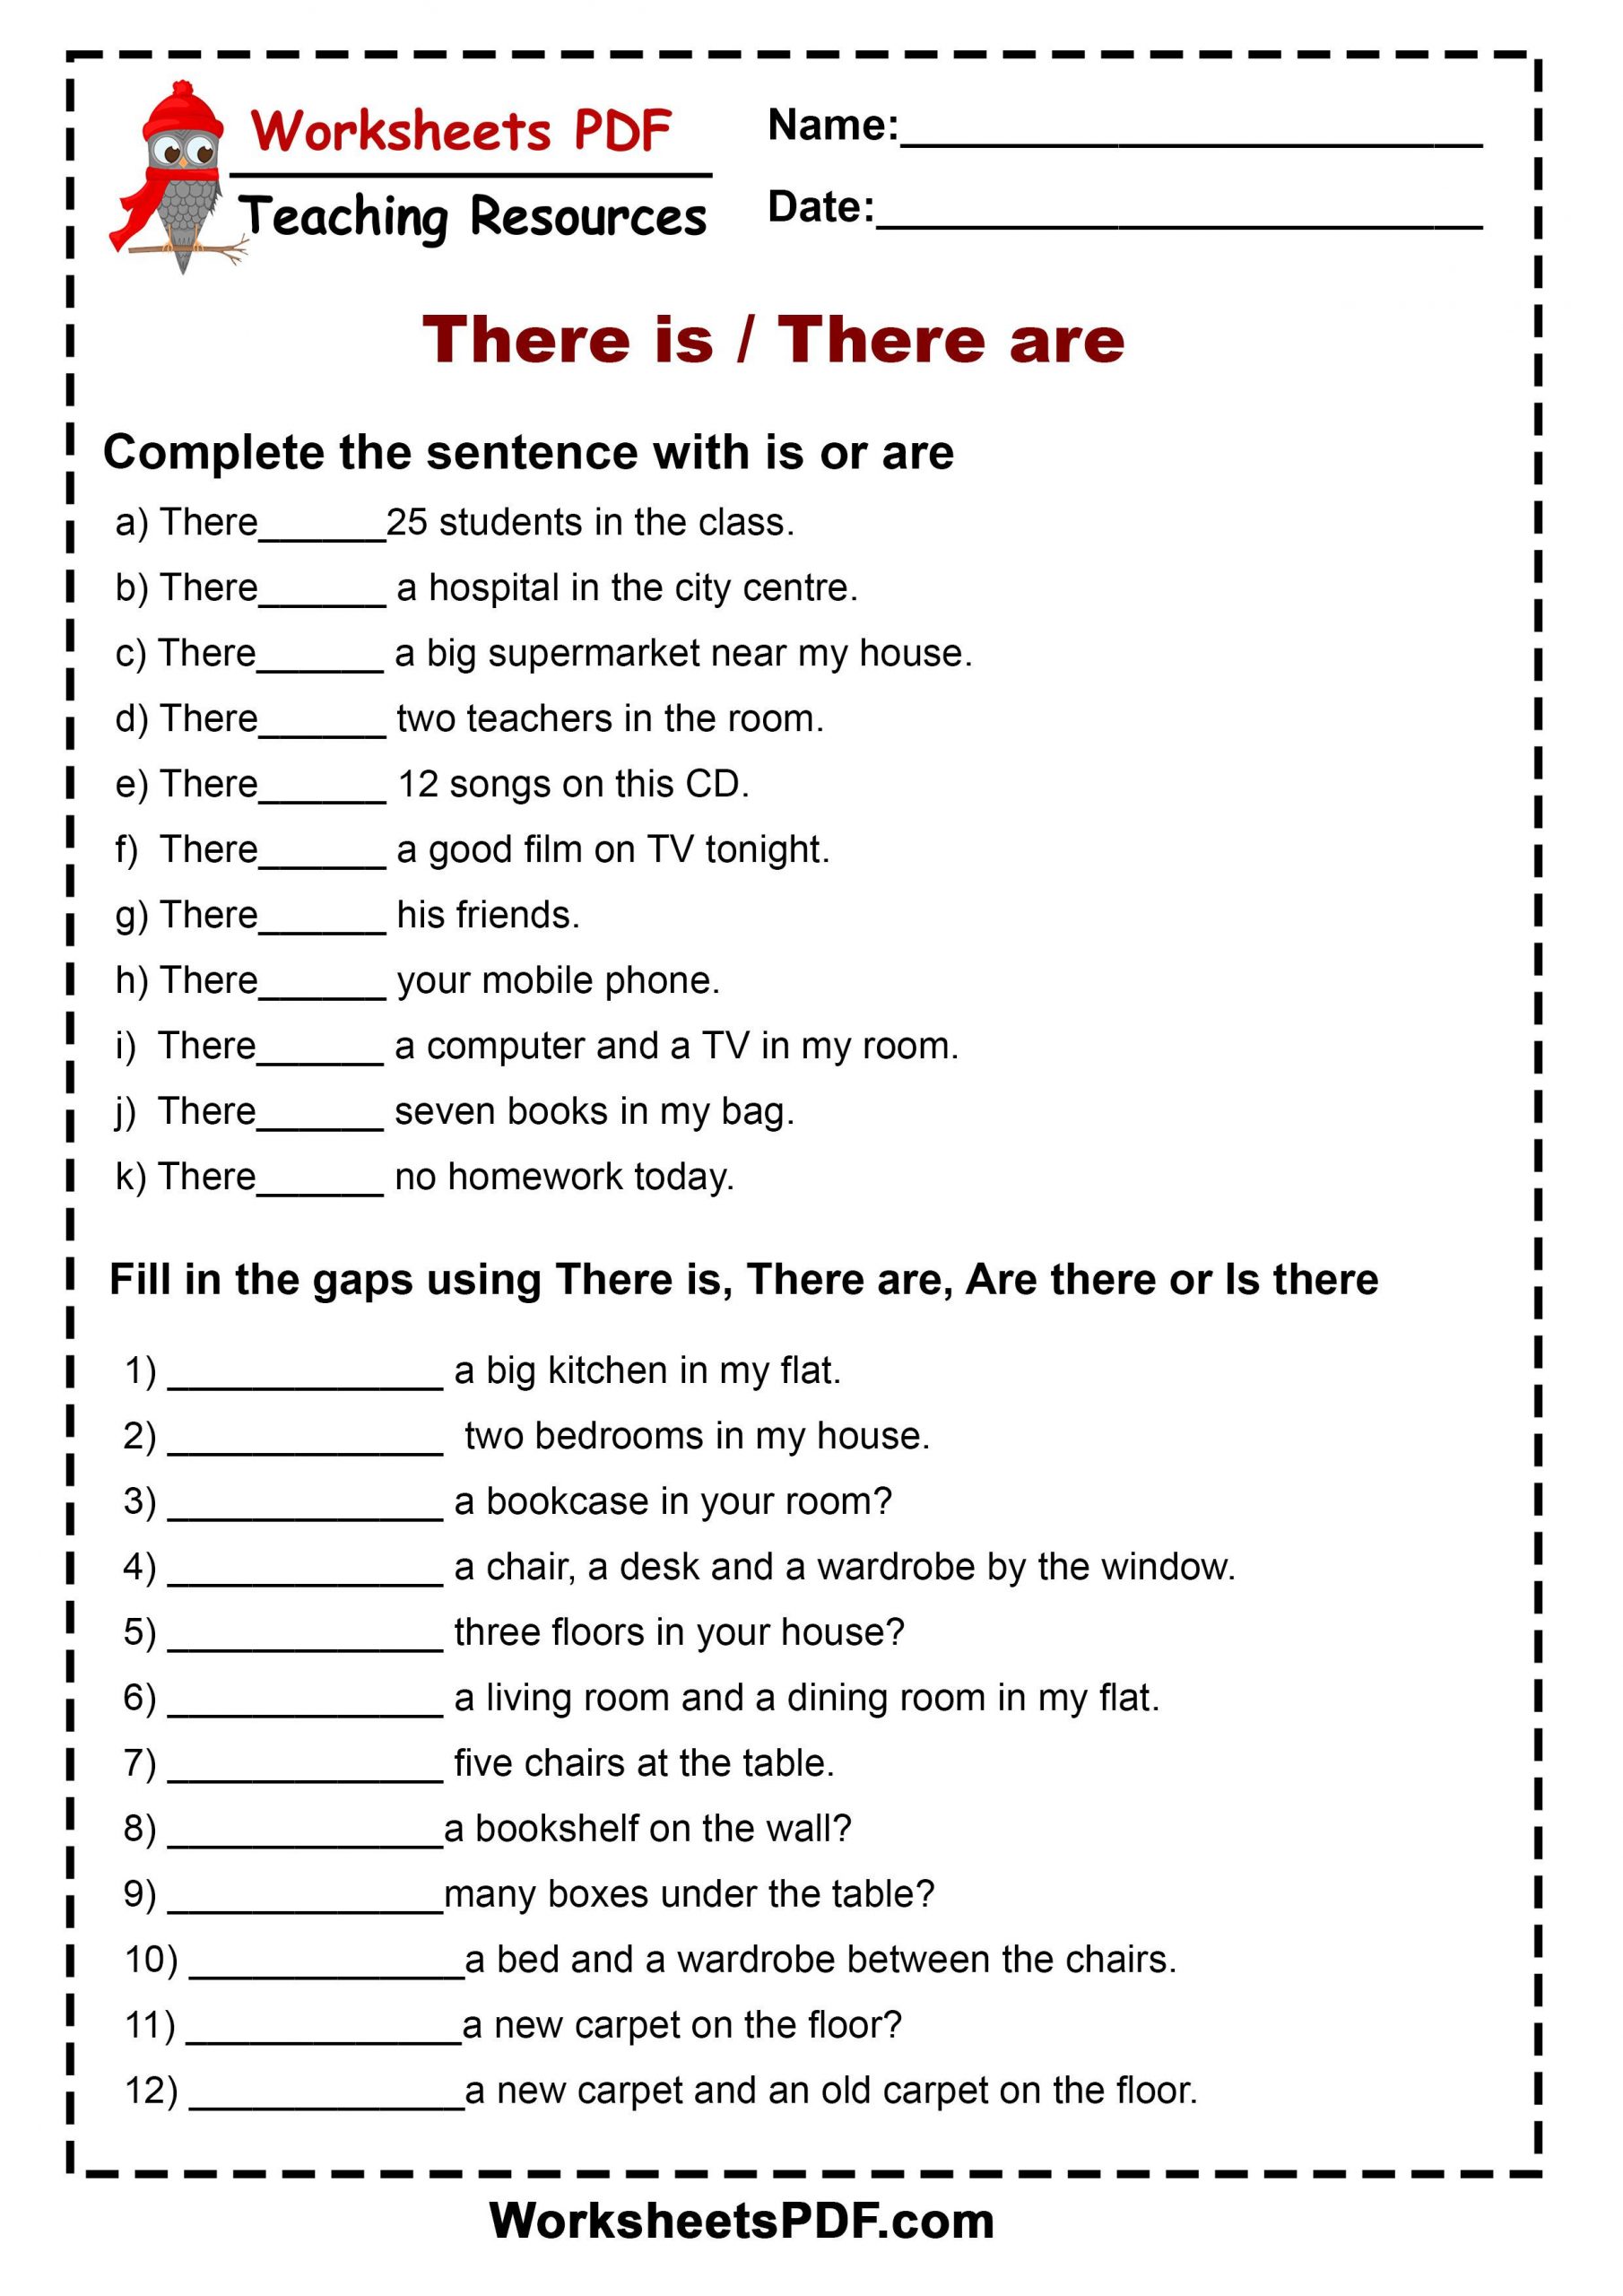 Relative Dating Worksheet Answer Key there is there are English Grammar Rules